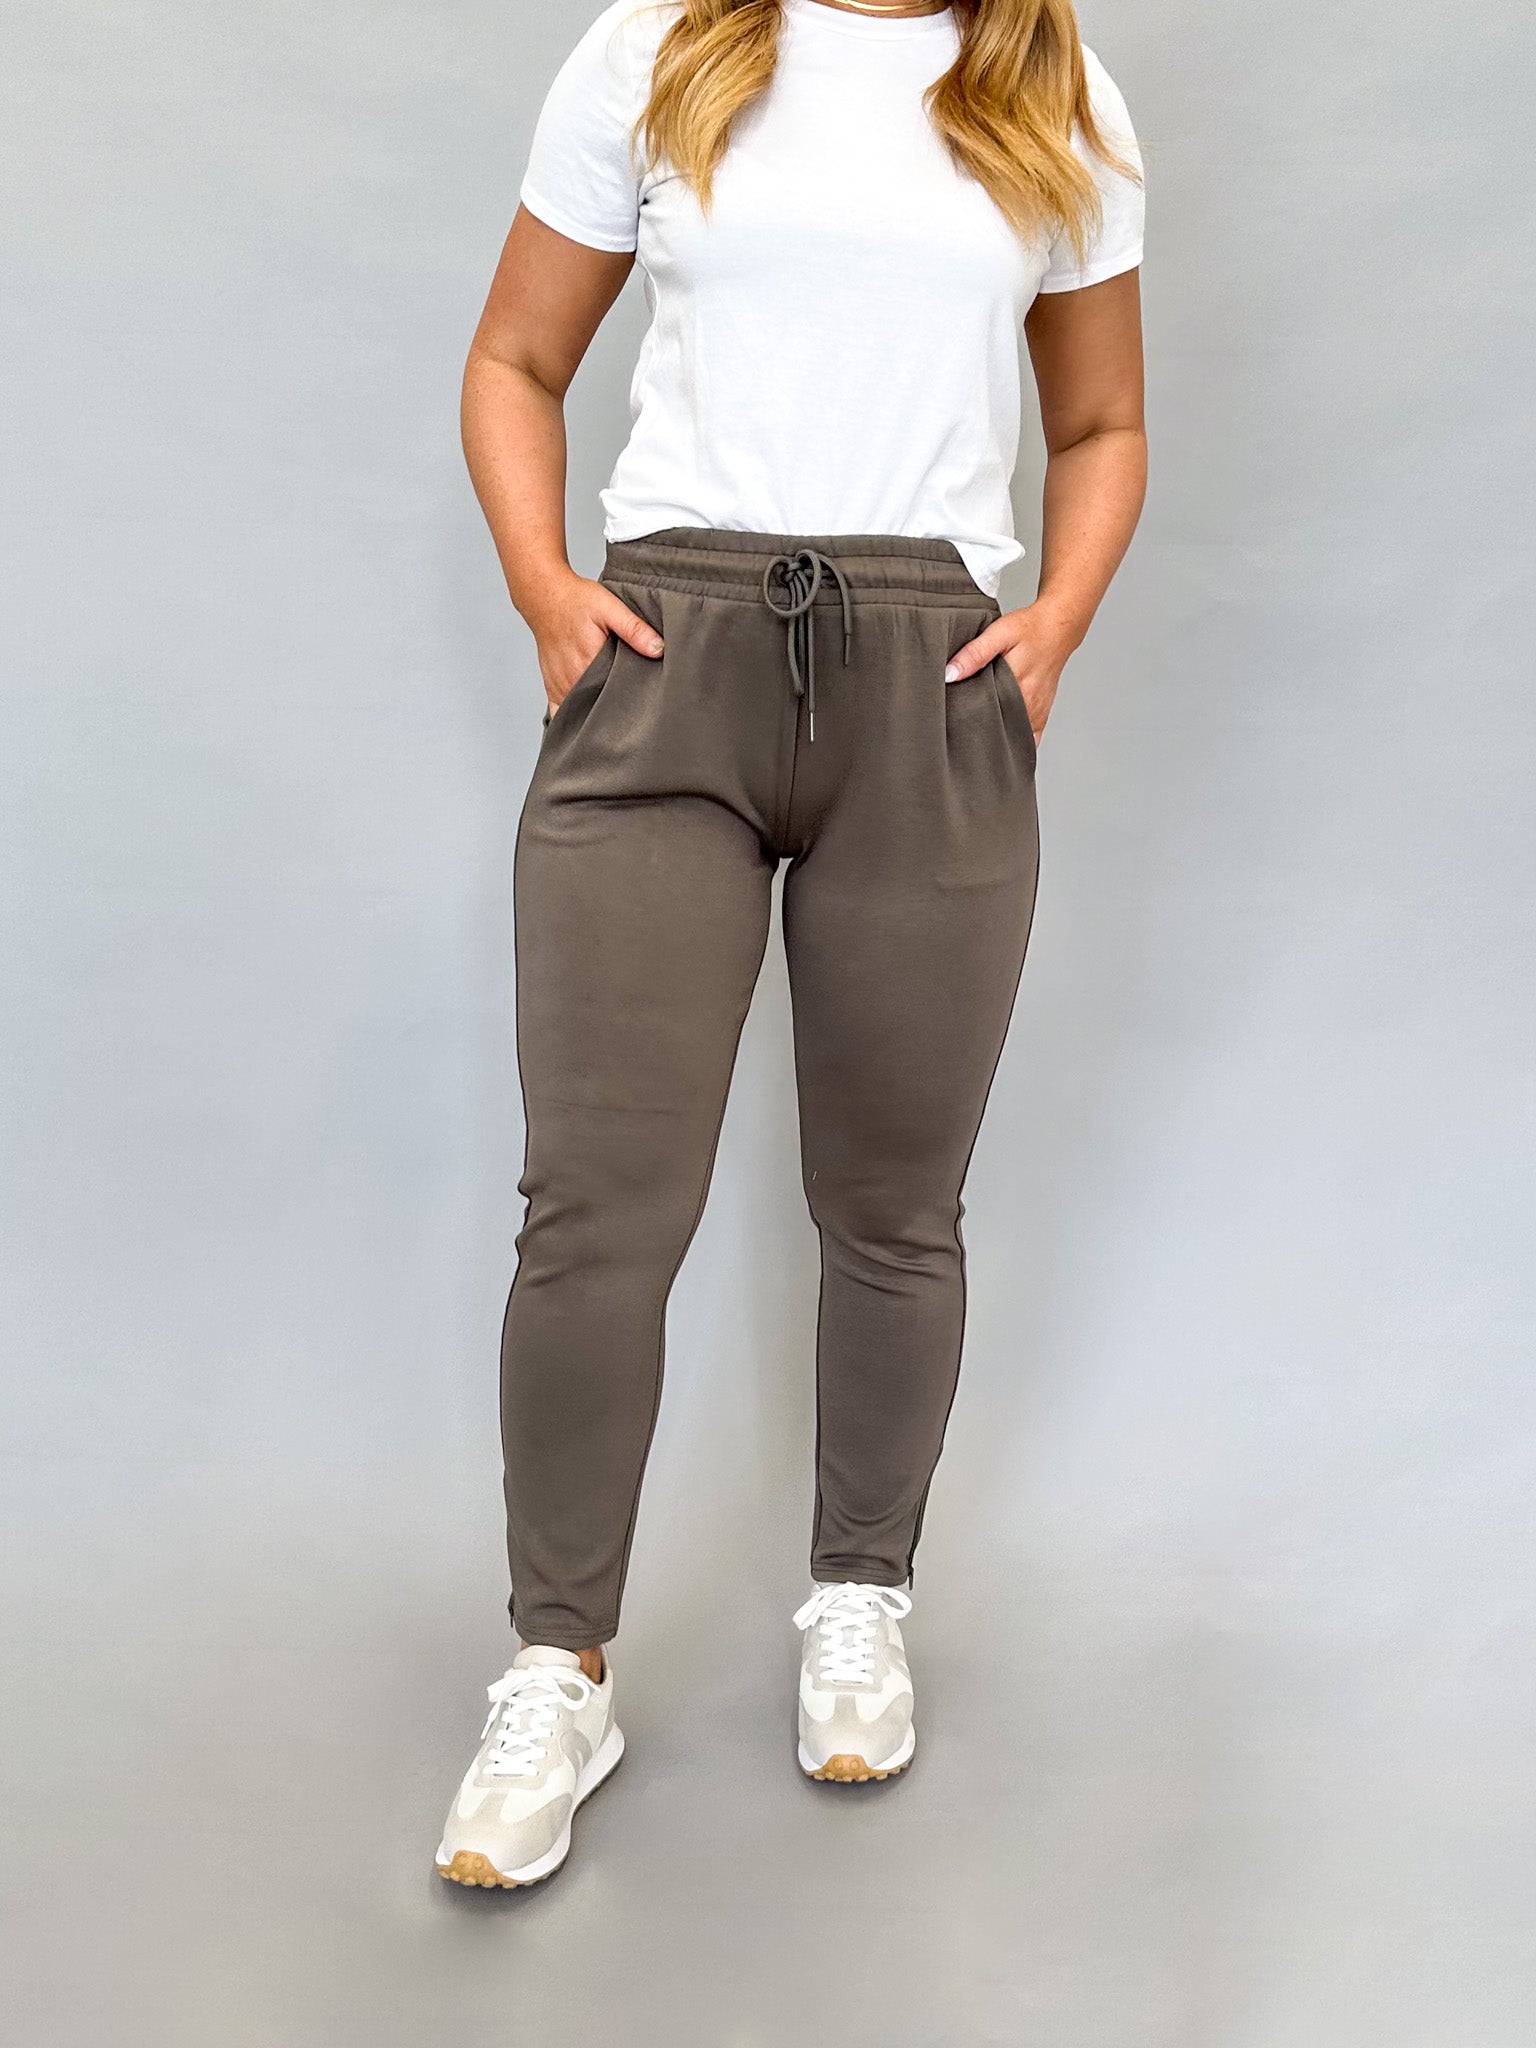 The Sage Jogger